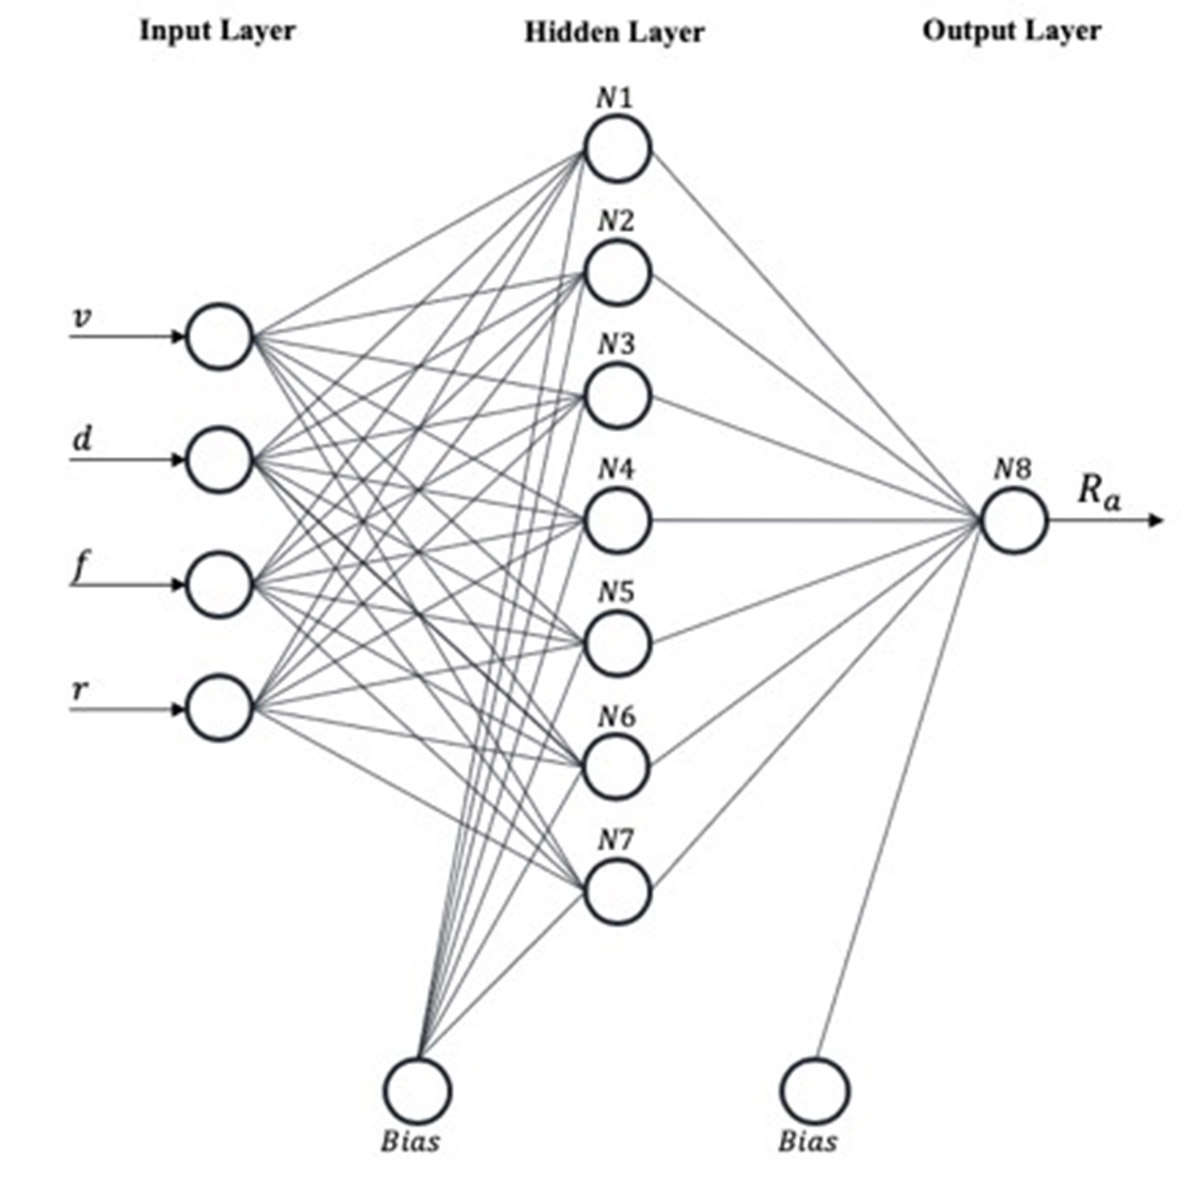 Graphical representation of the network structure